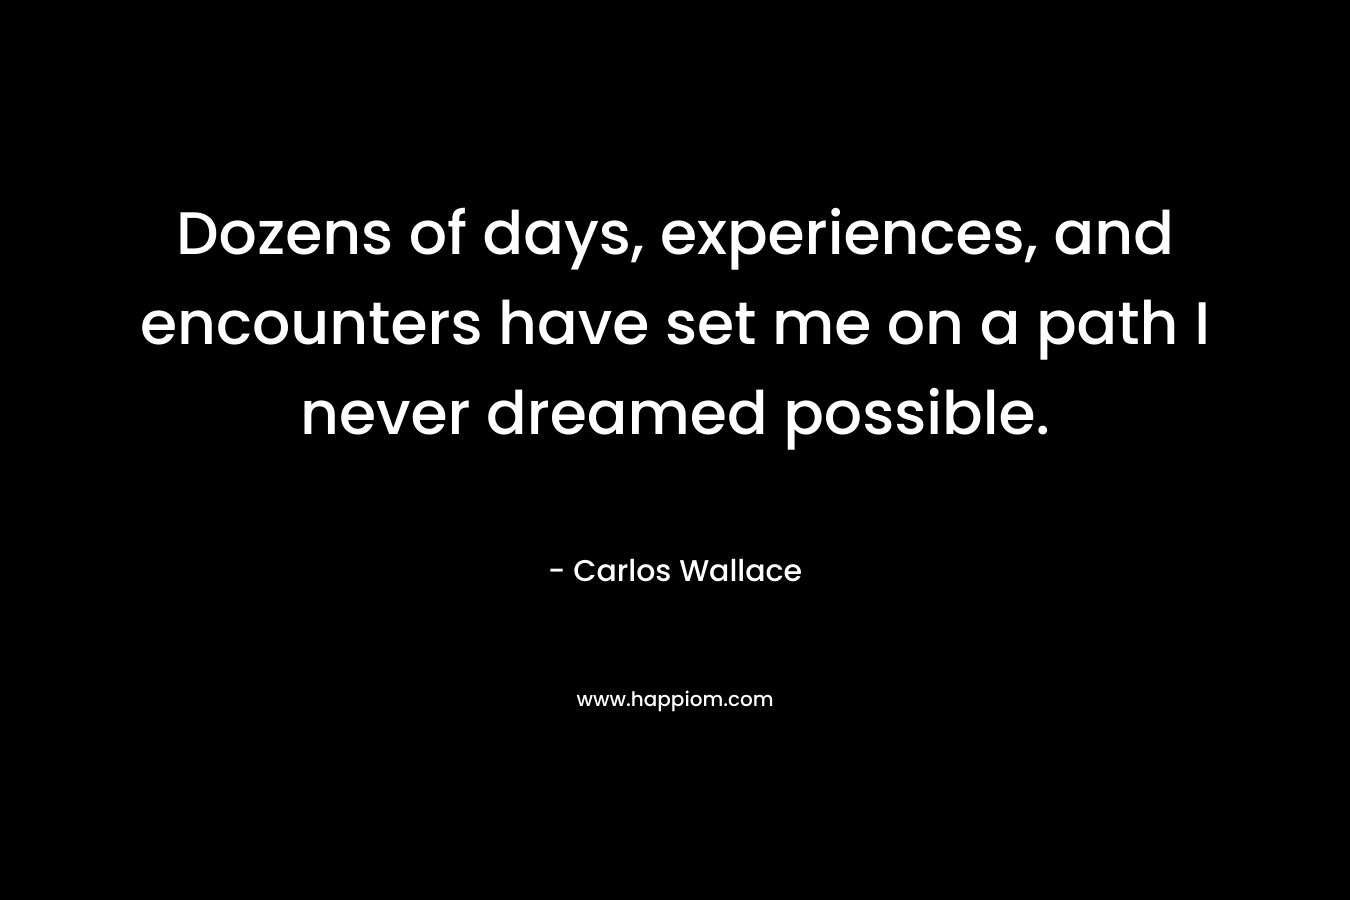 Dozens of days, experiences, and encounters have set me on a path I never dreamed possible. – Carlos Wallace